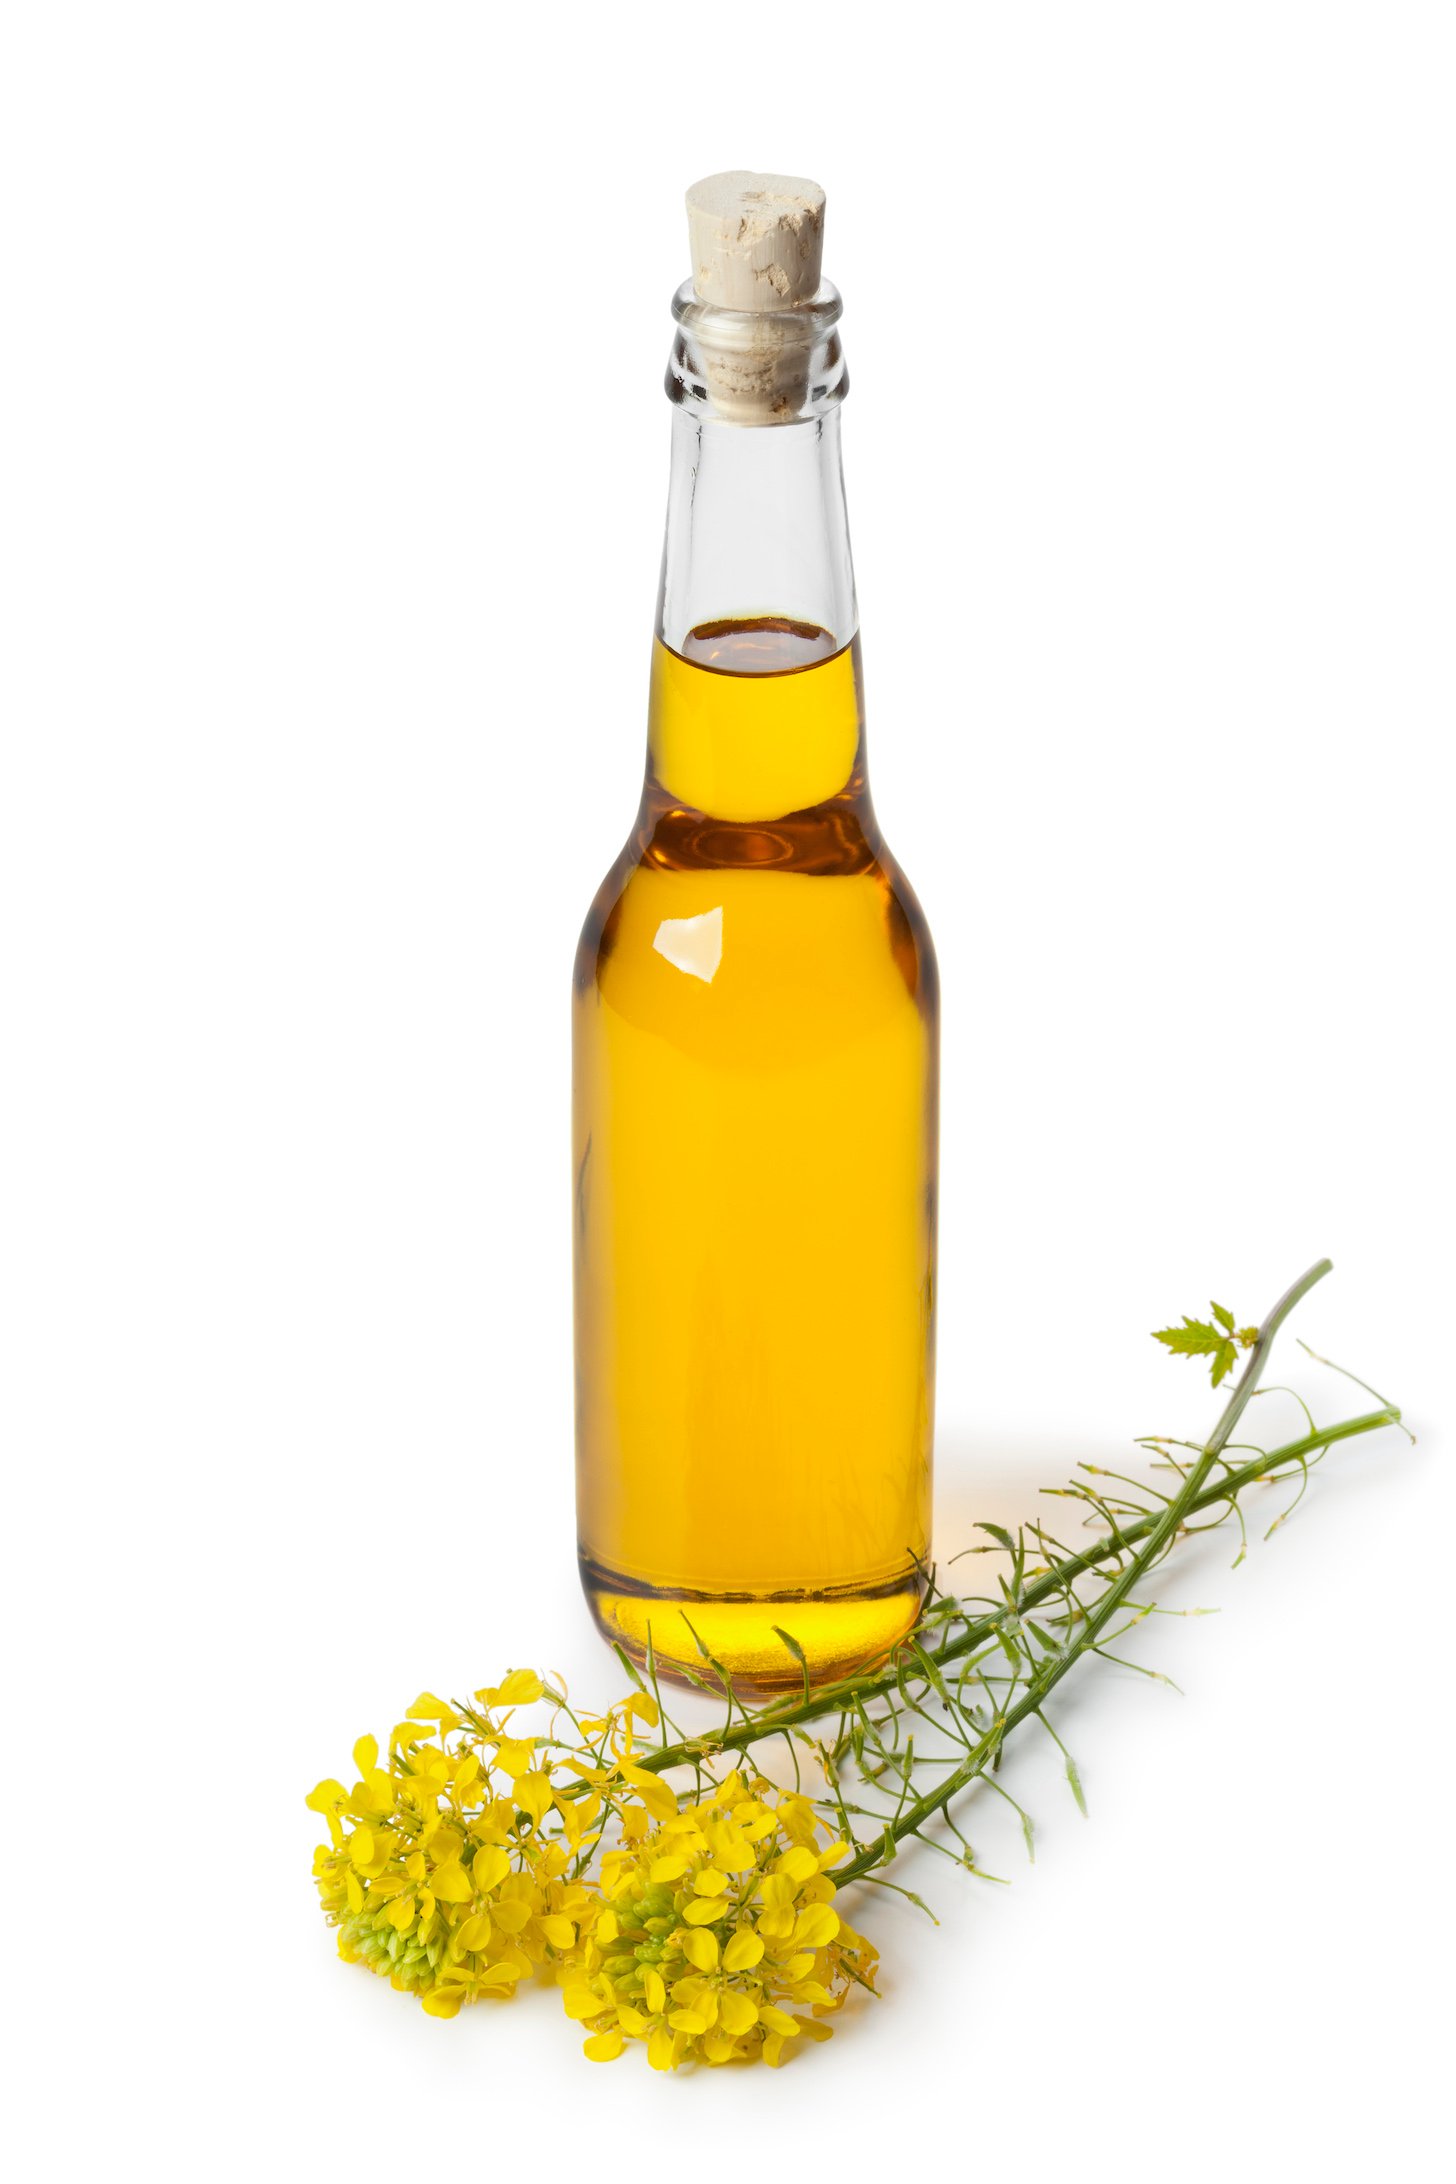 Rapeseed oil in a bottle on white background